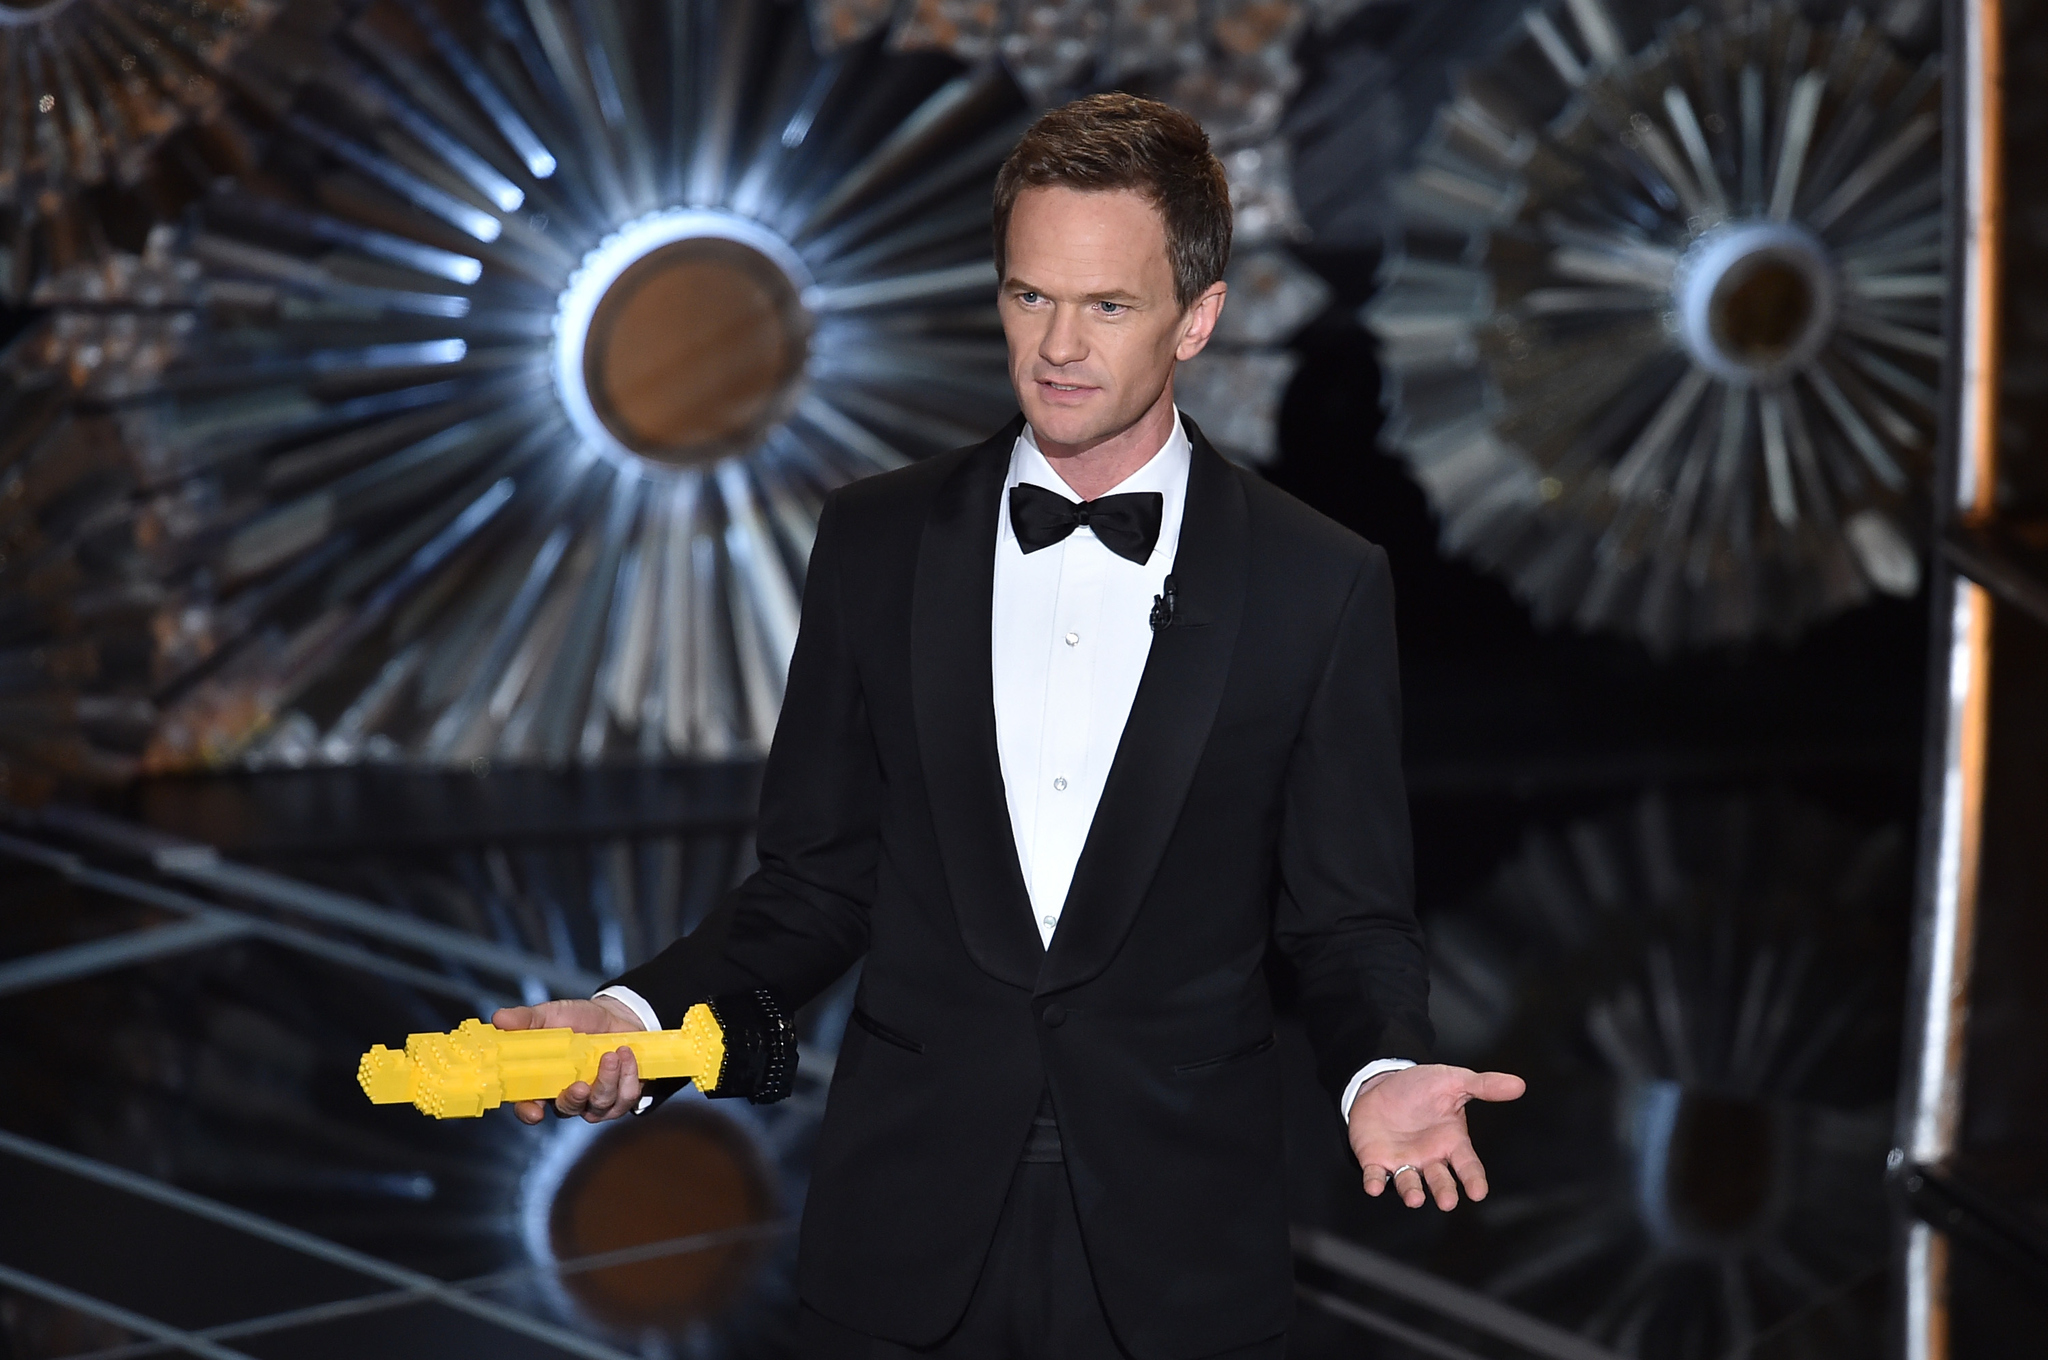 Neil Patrick Harris at event of The Oscars (2015)